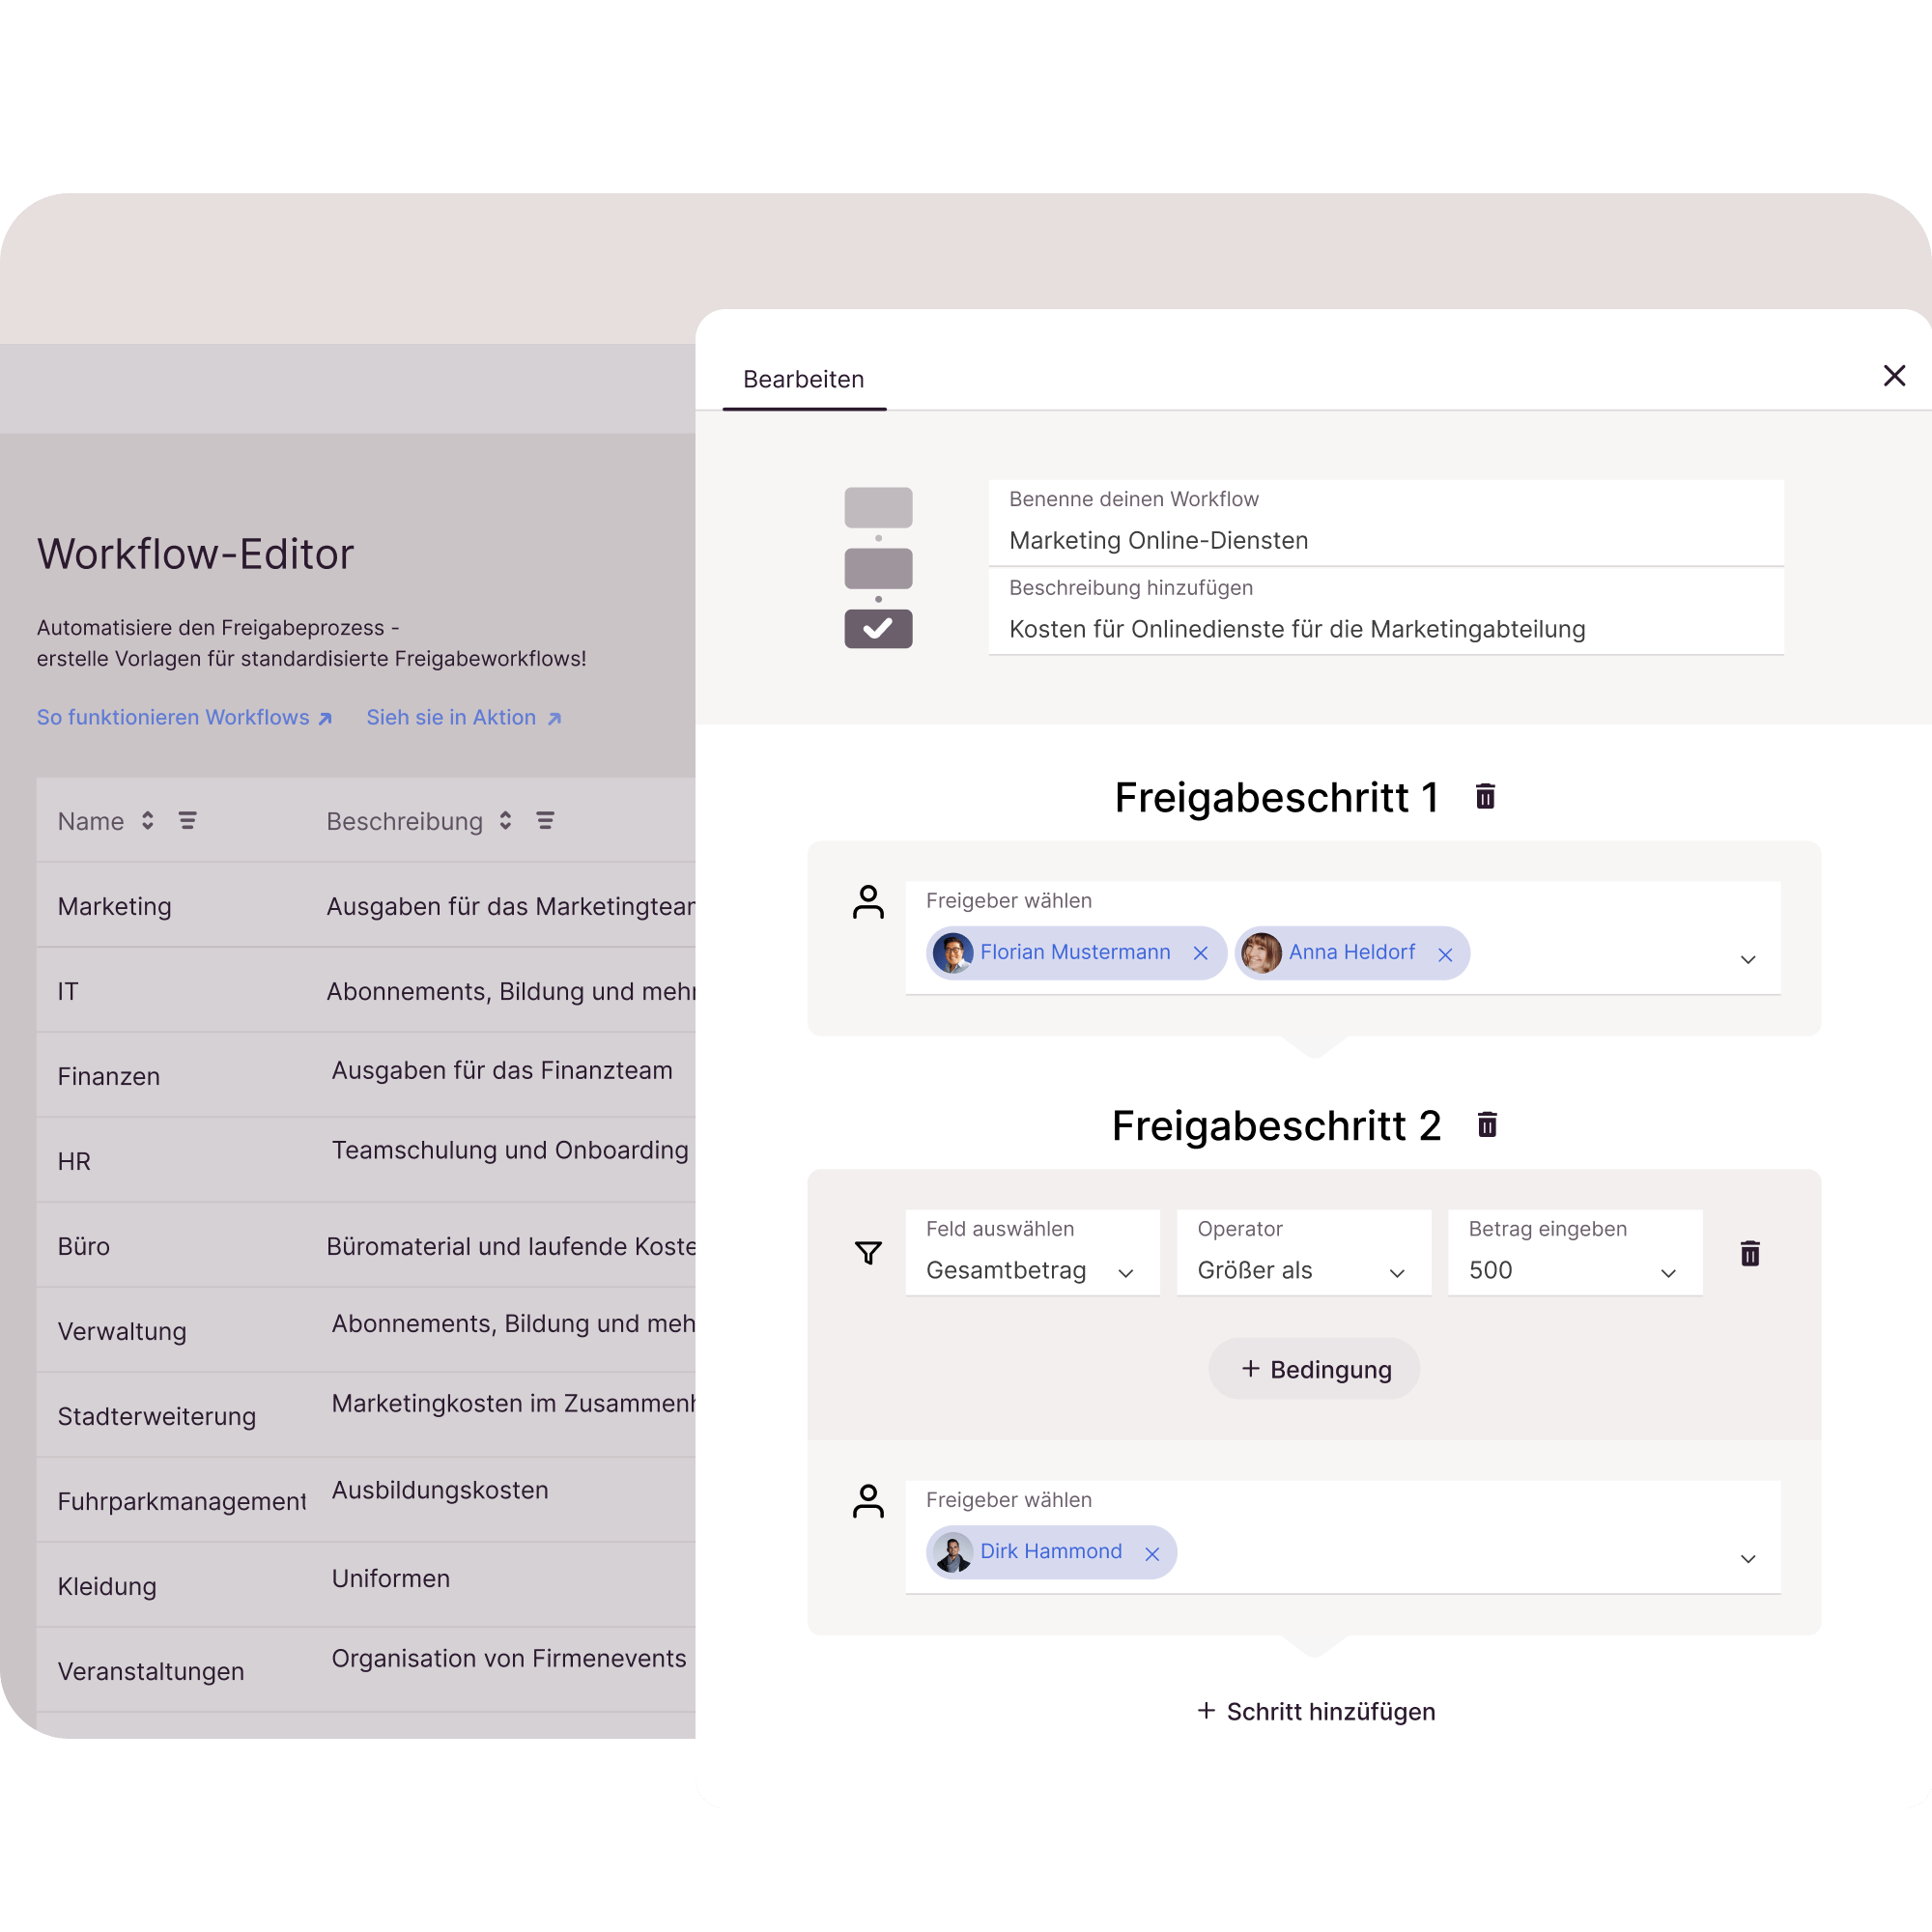 Set individual approval workflows